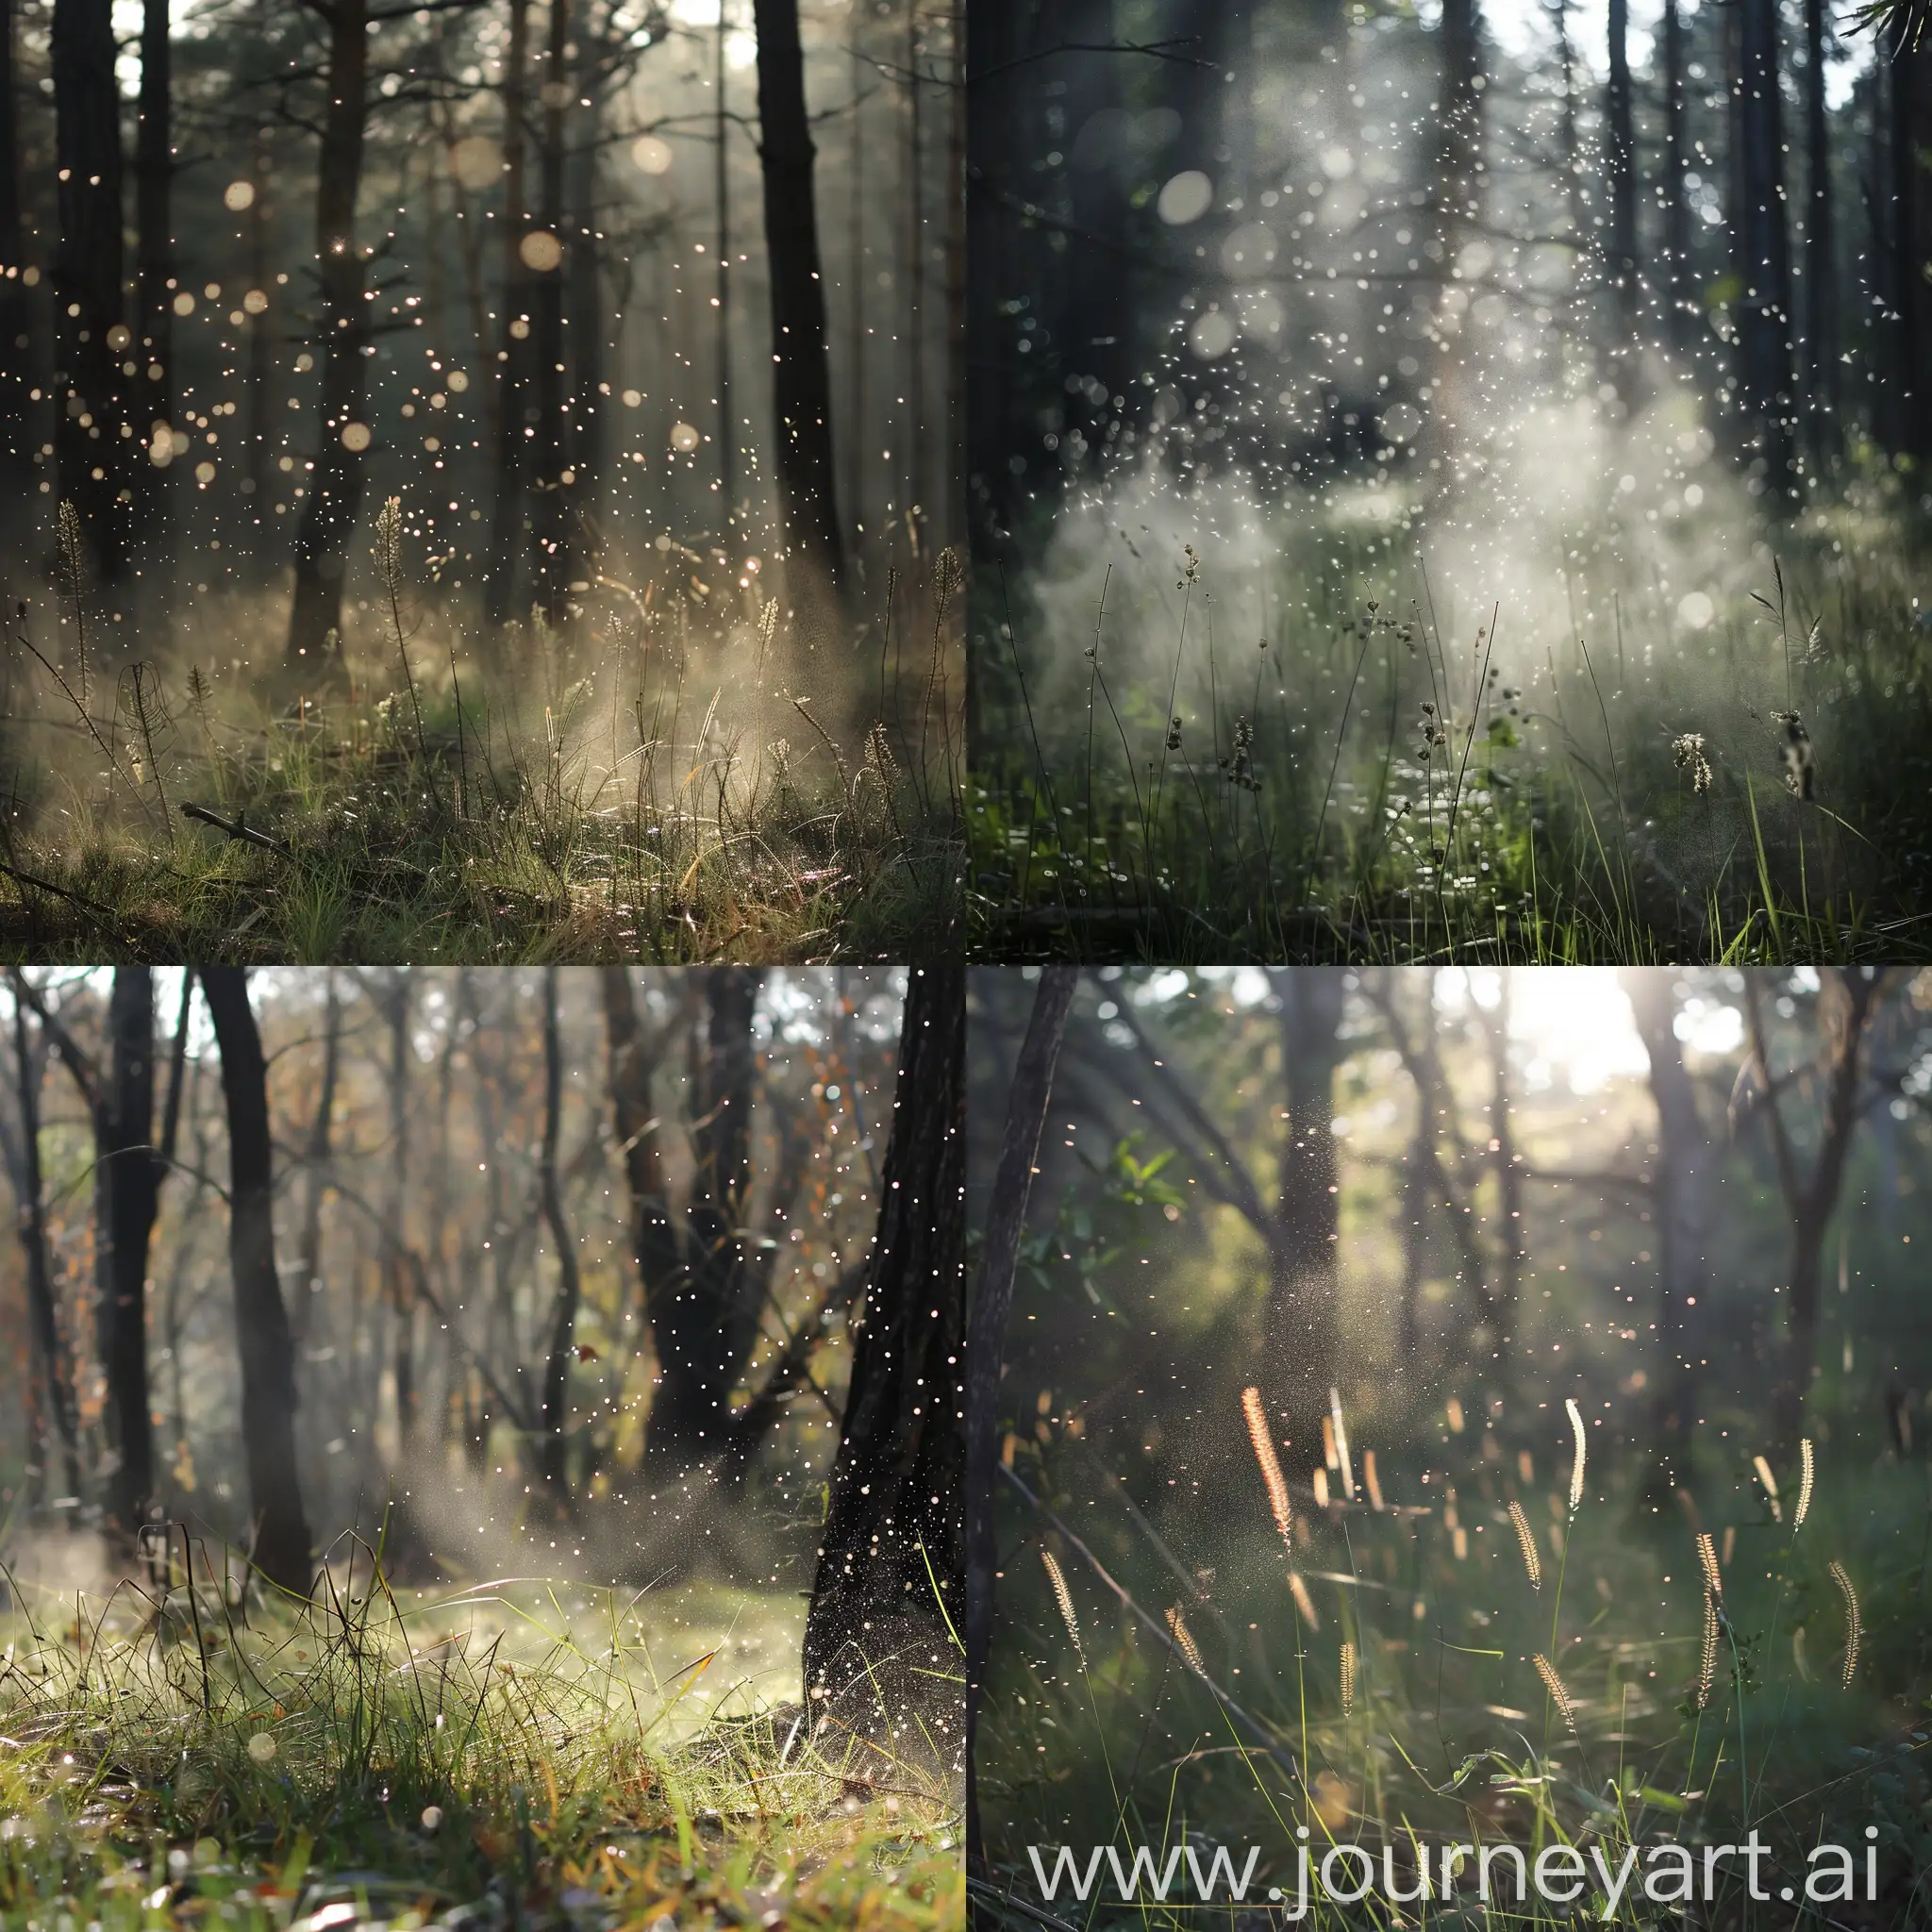 grass in forest with sparcles and ferry dust in the air